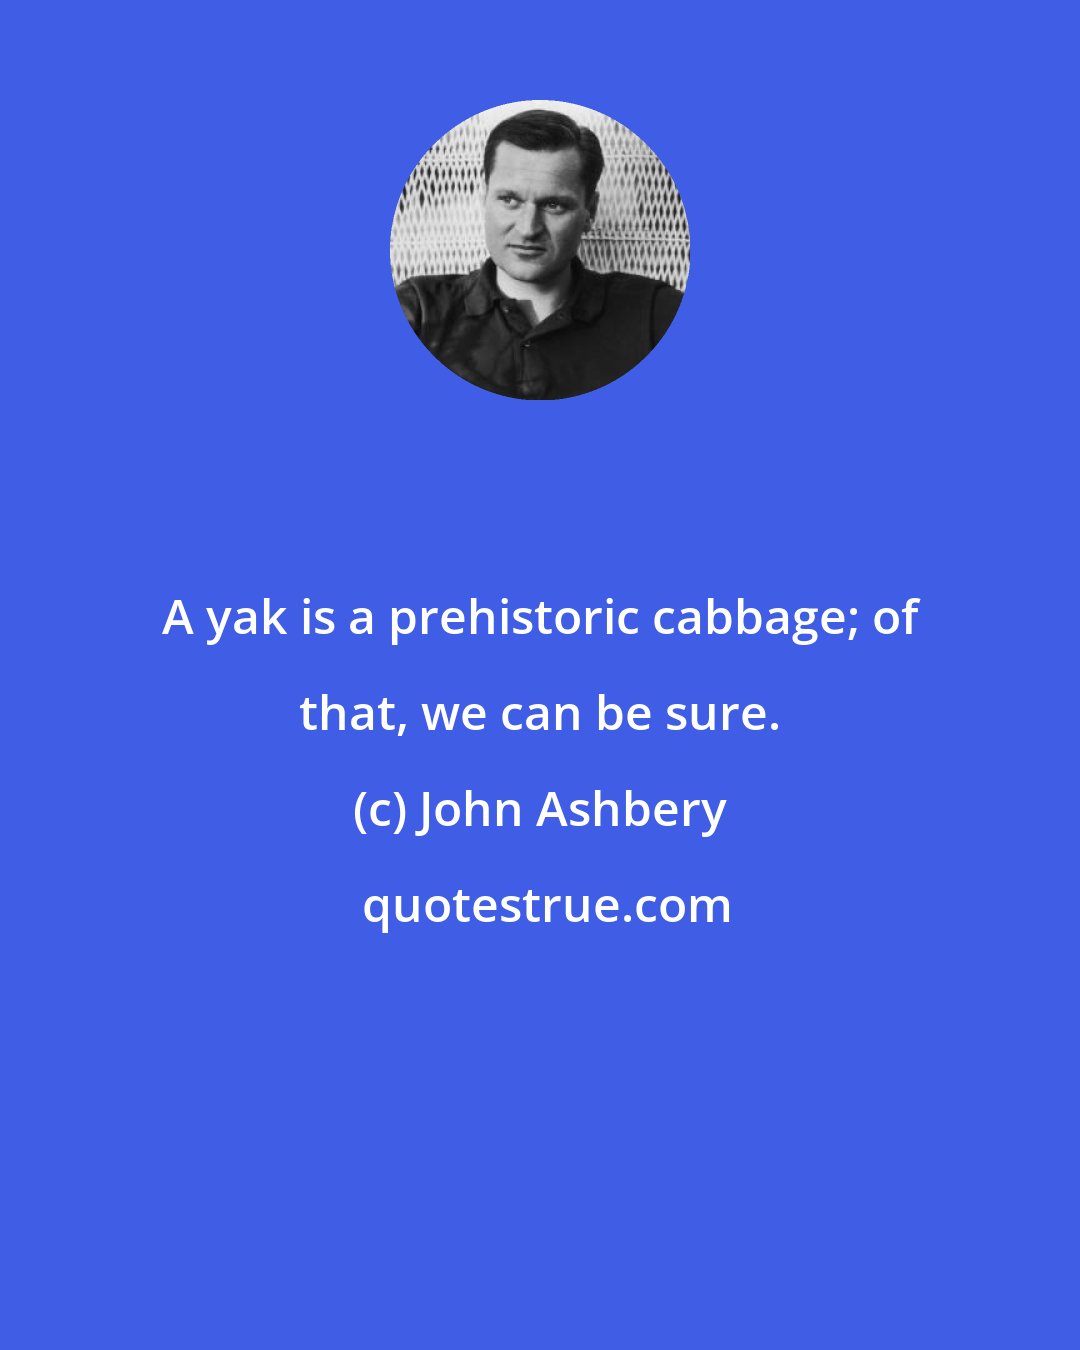 John Ashbery: A yak is a prehistoric cabbage; of that, we can be sure.